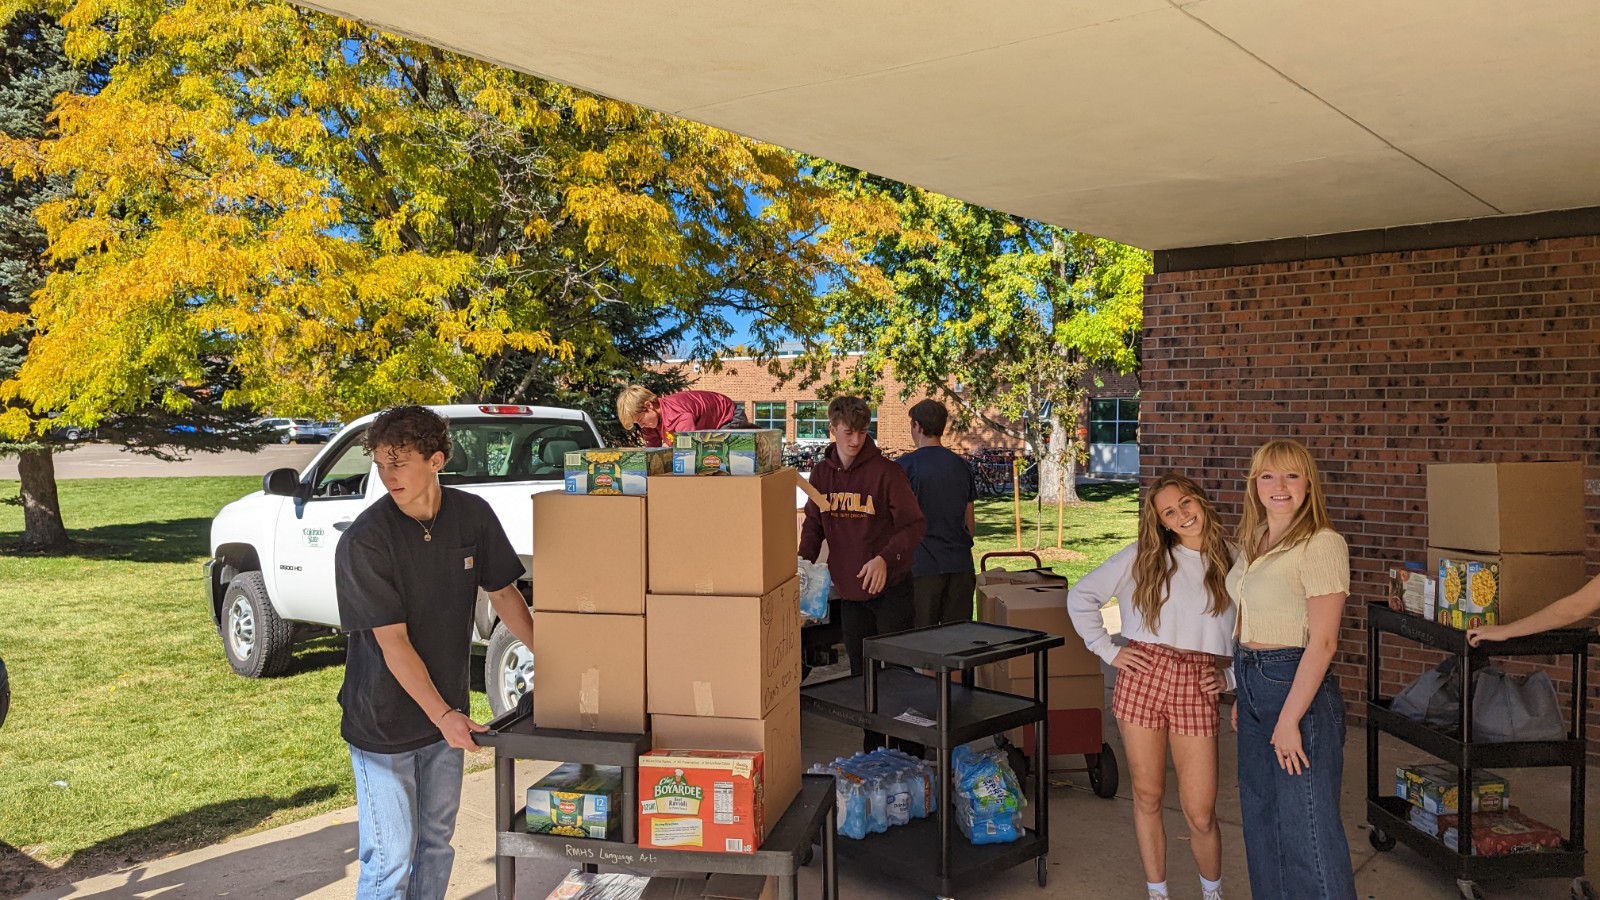 Rocky Mountain High School students load up boxes of canned goods in vehicles for CSU CANS Around the Oval.